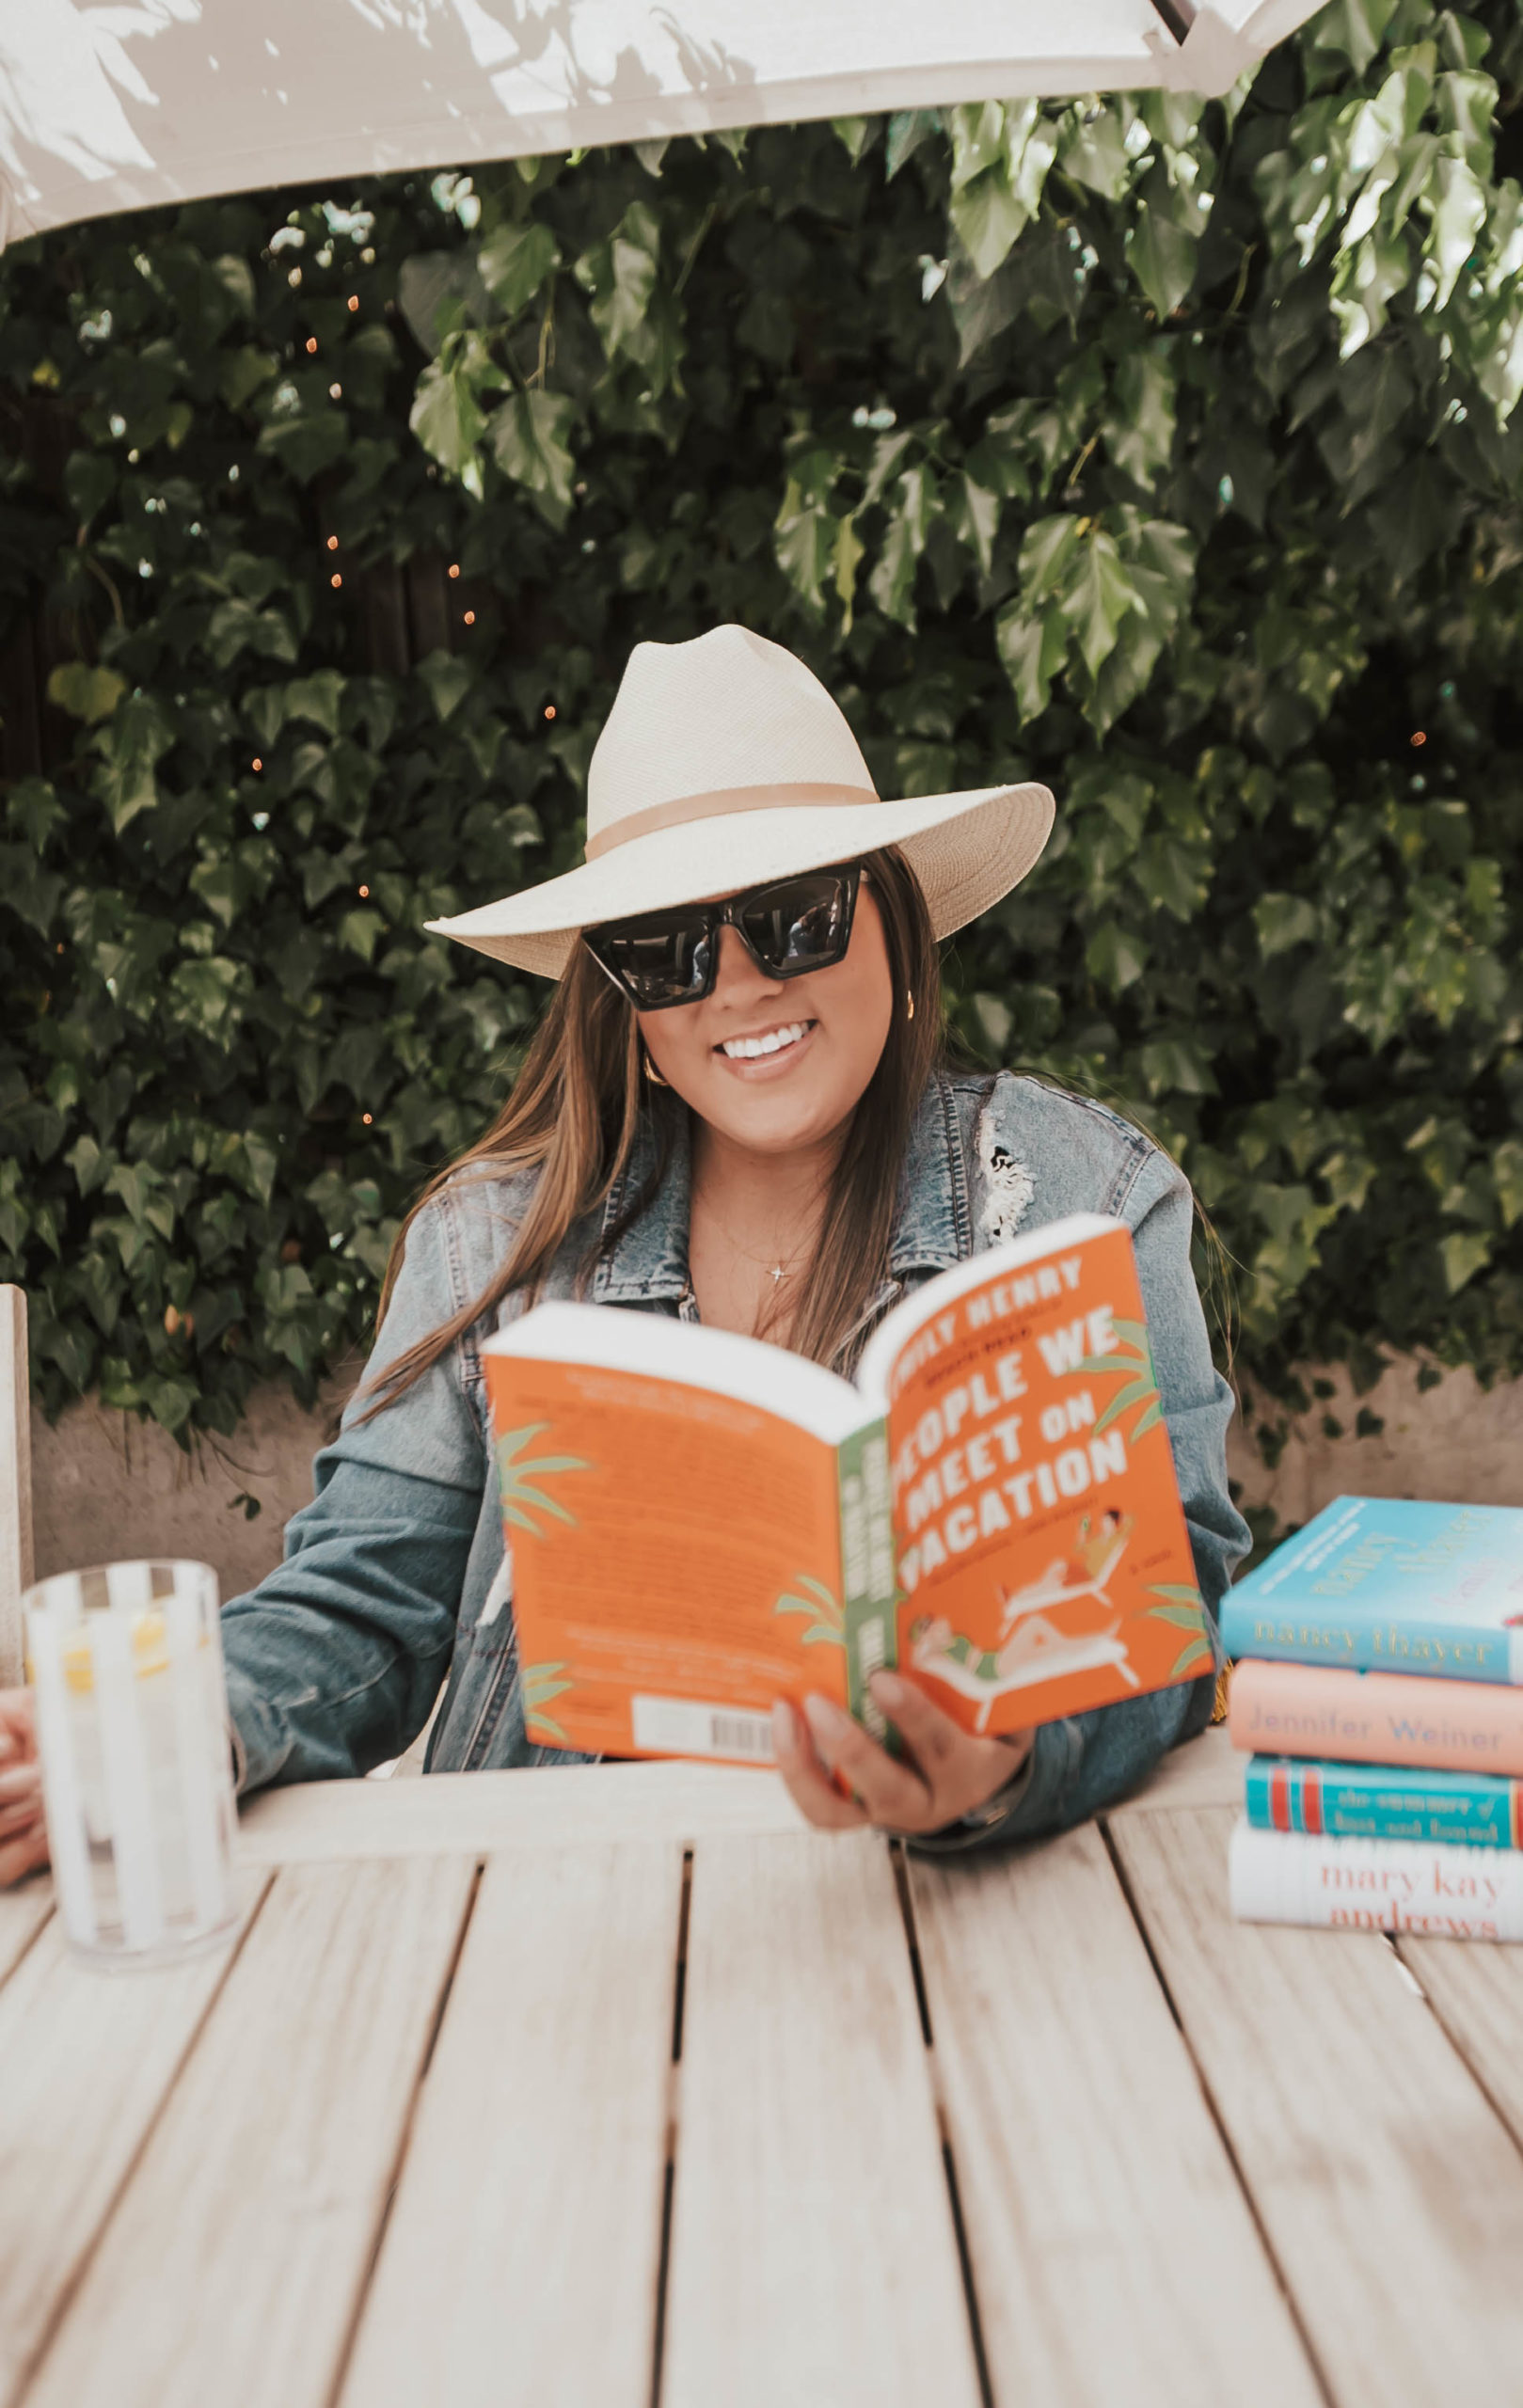 Reno blogger, Ashley Zeal Hurd, from The Ashley and Emily blog share her much anticipated list of books to read this summer. 